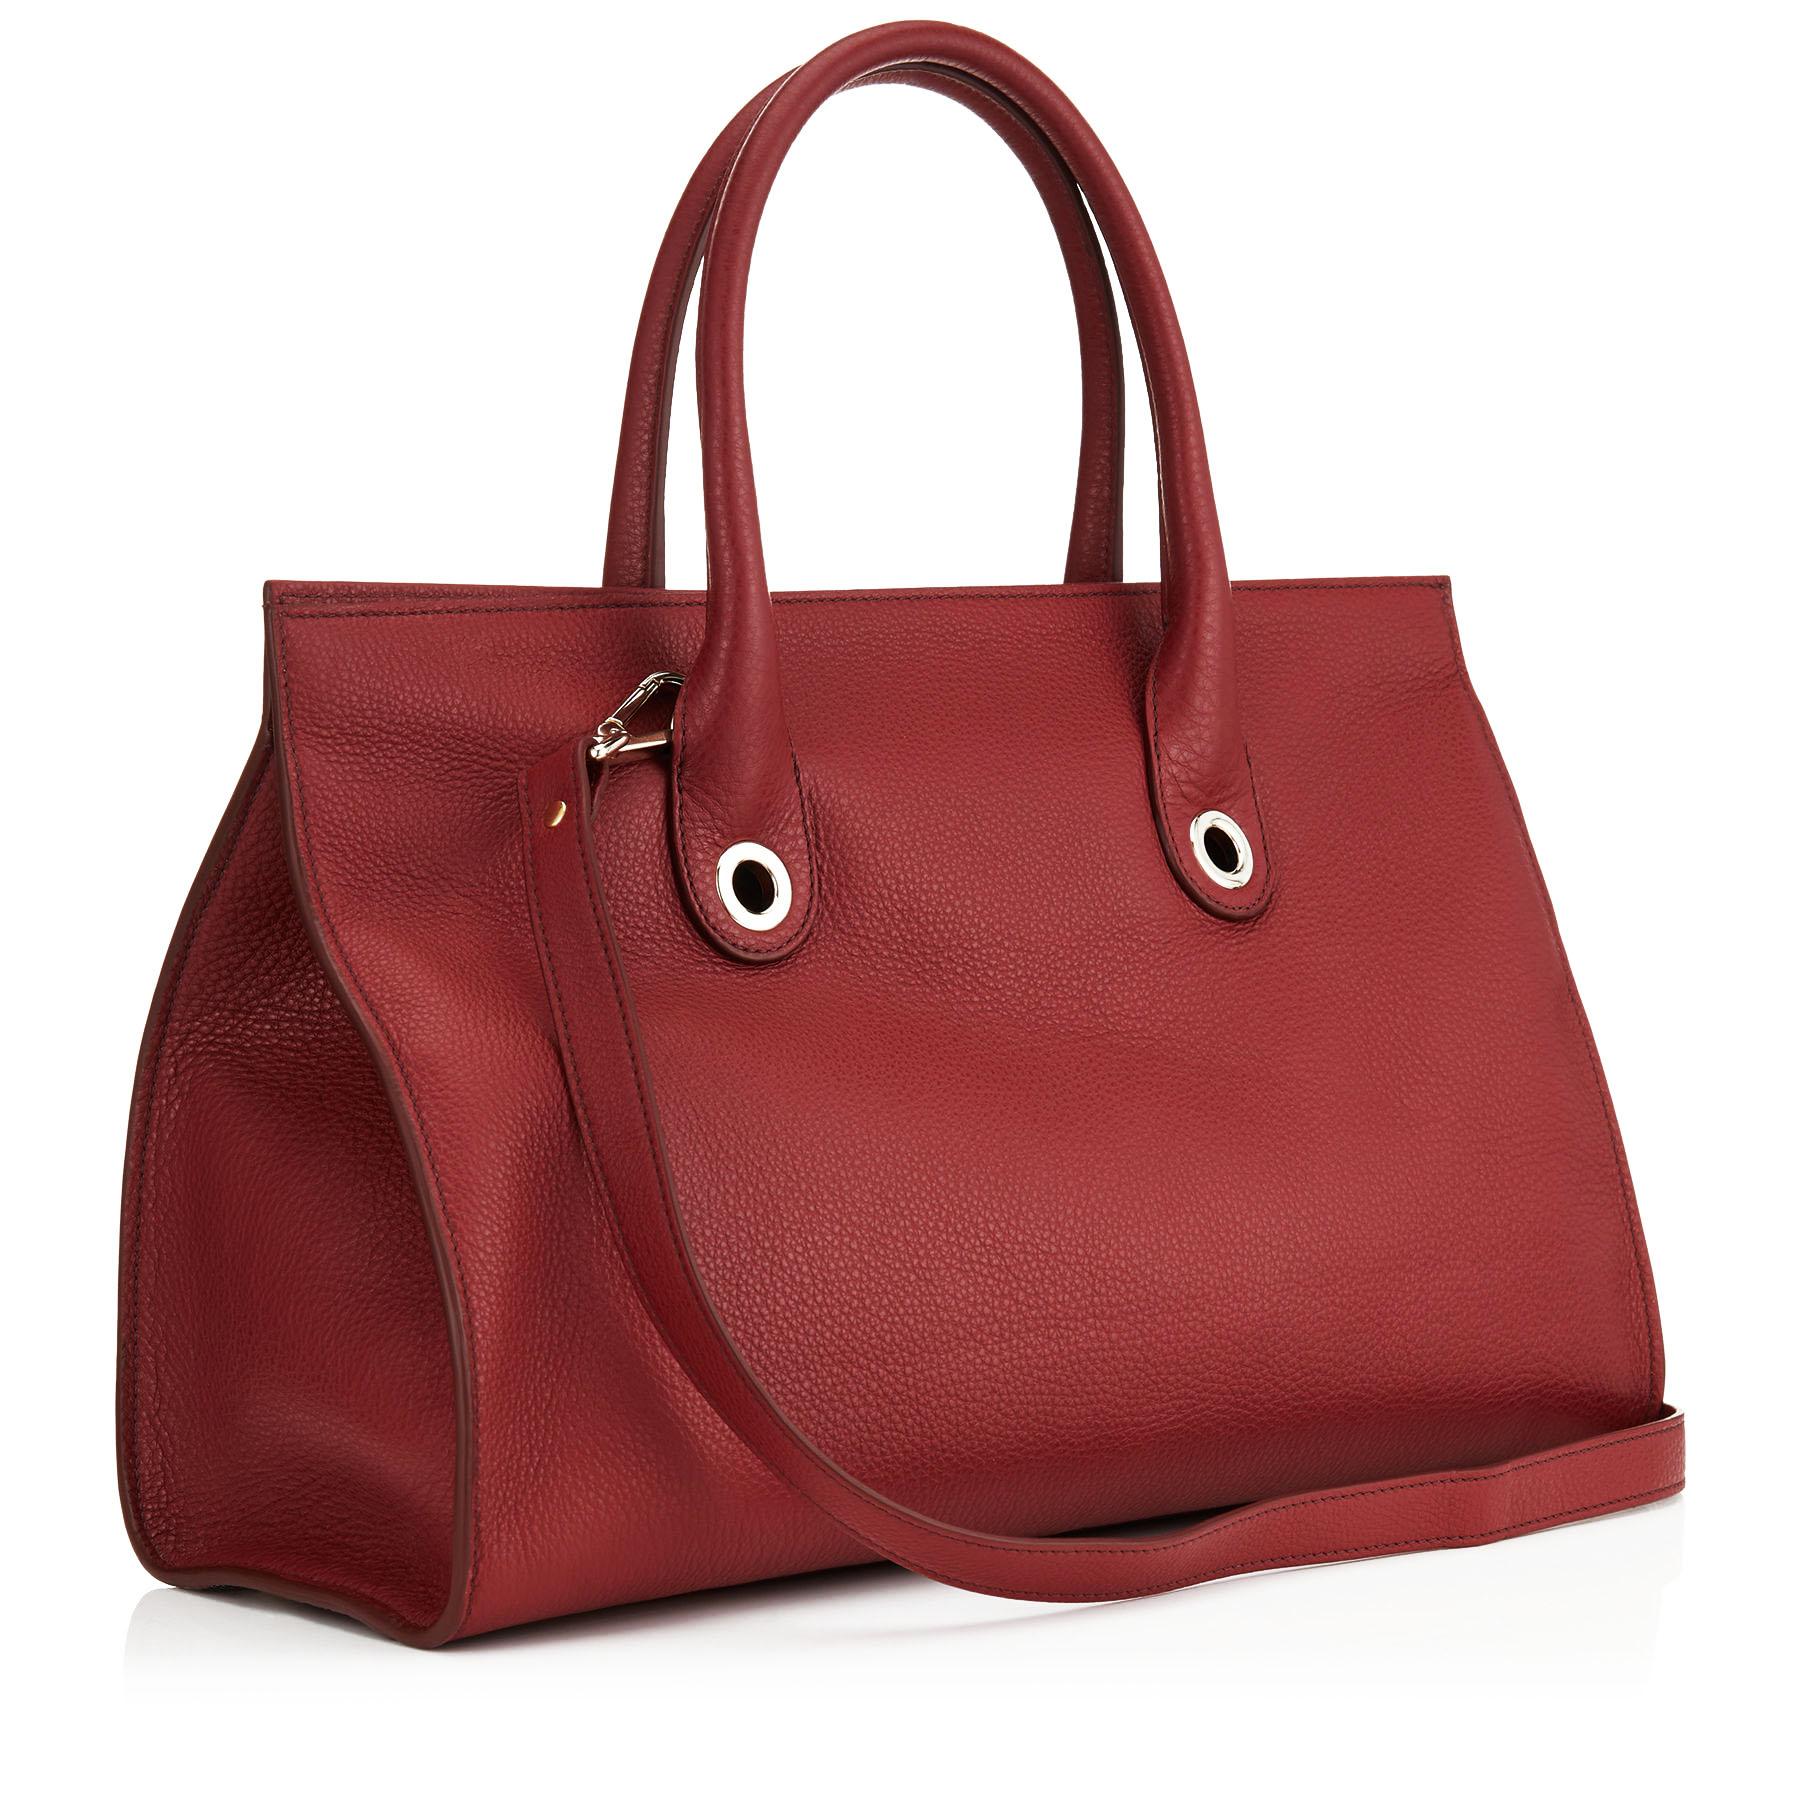 This popular Jimmy Choo Riley's Grainy Calf Leather Cross-body Bag in Red ( Wine ). The over sized tote bag is trimmed with gold-toned hardware. The opening features a flip-lock closure at front and 4 protective metal feet on bottom. The removable